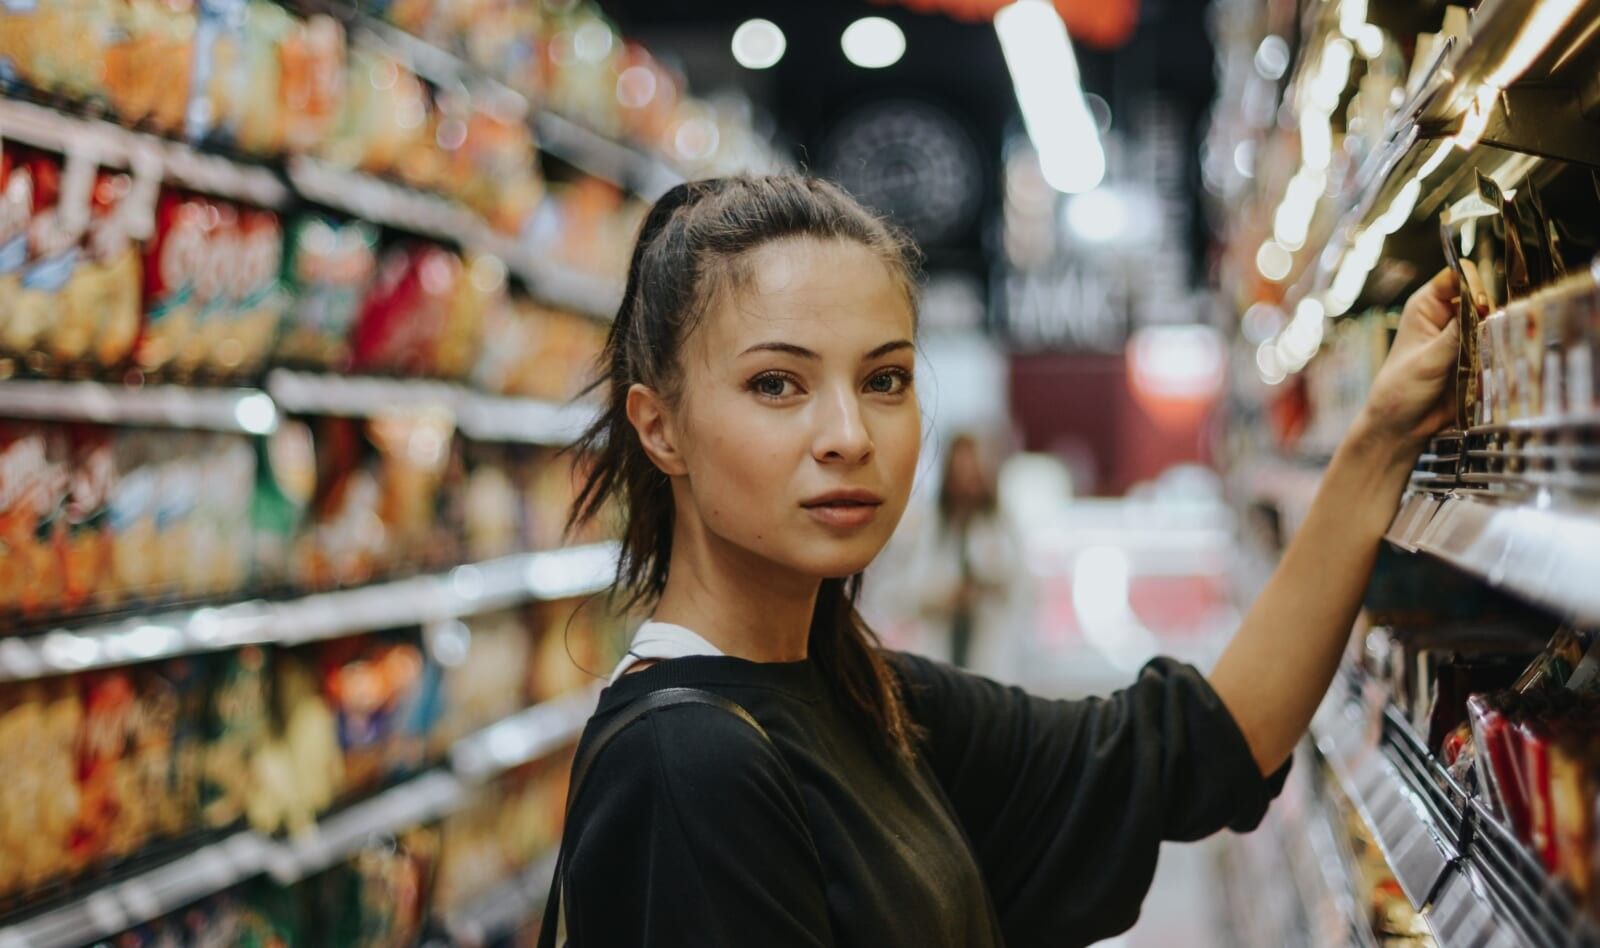 woman grocery shopping looks into lens